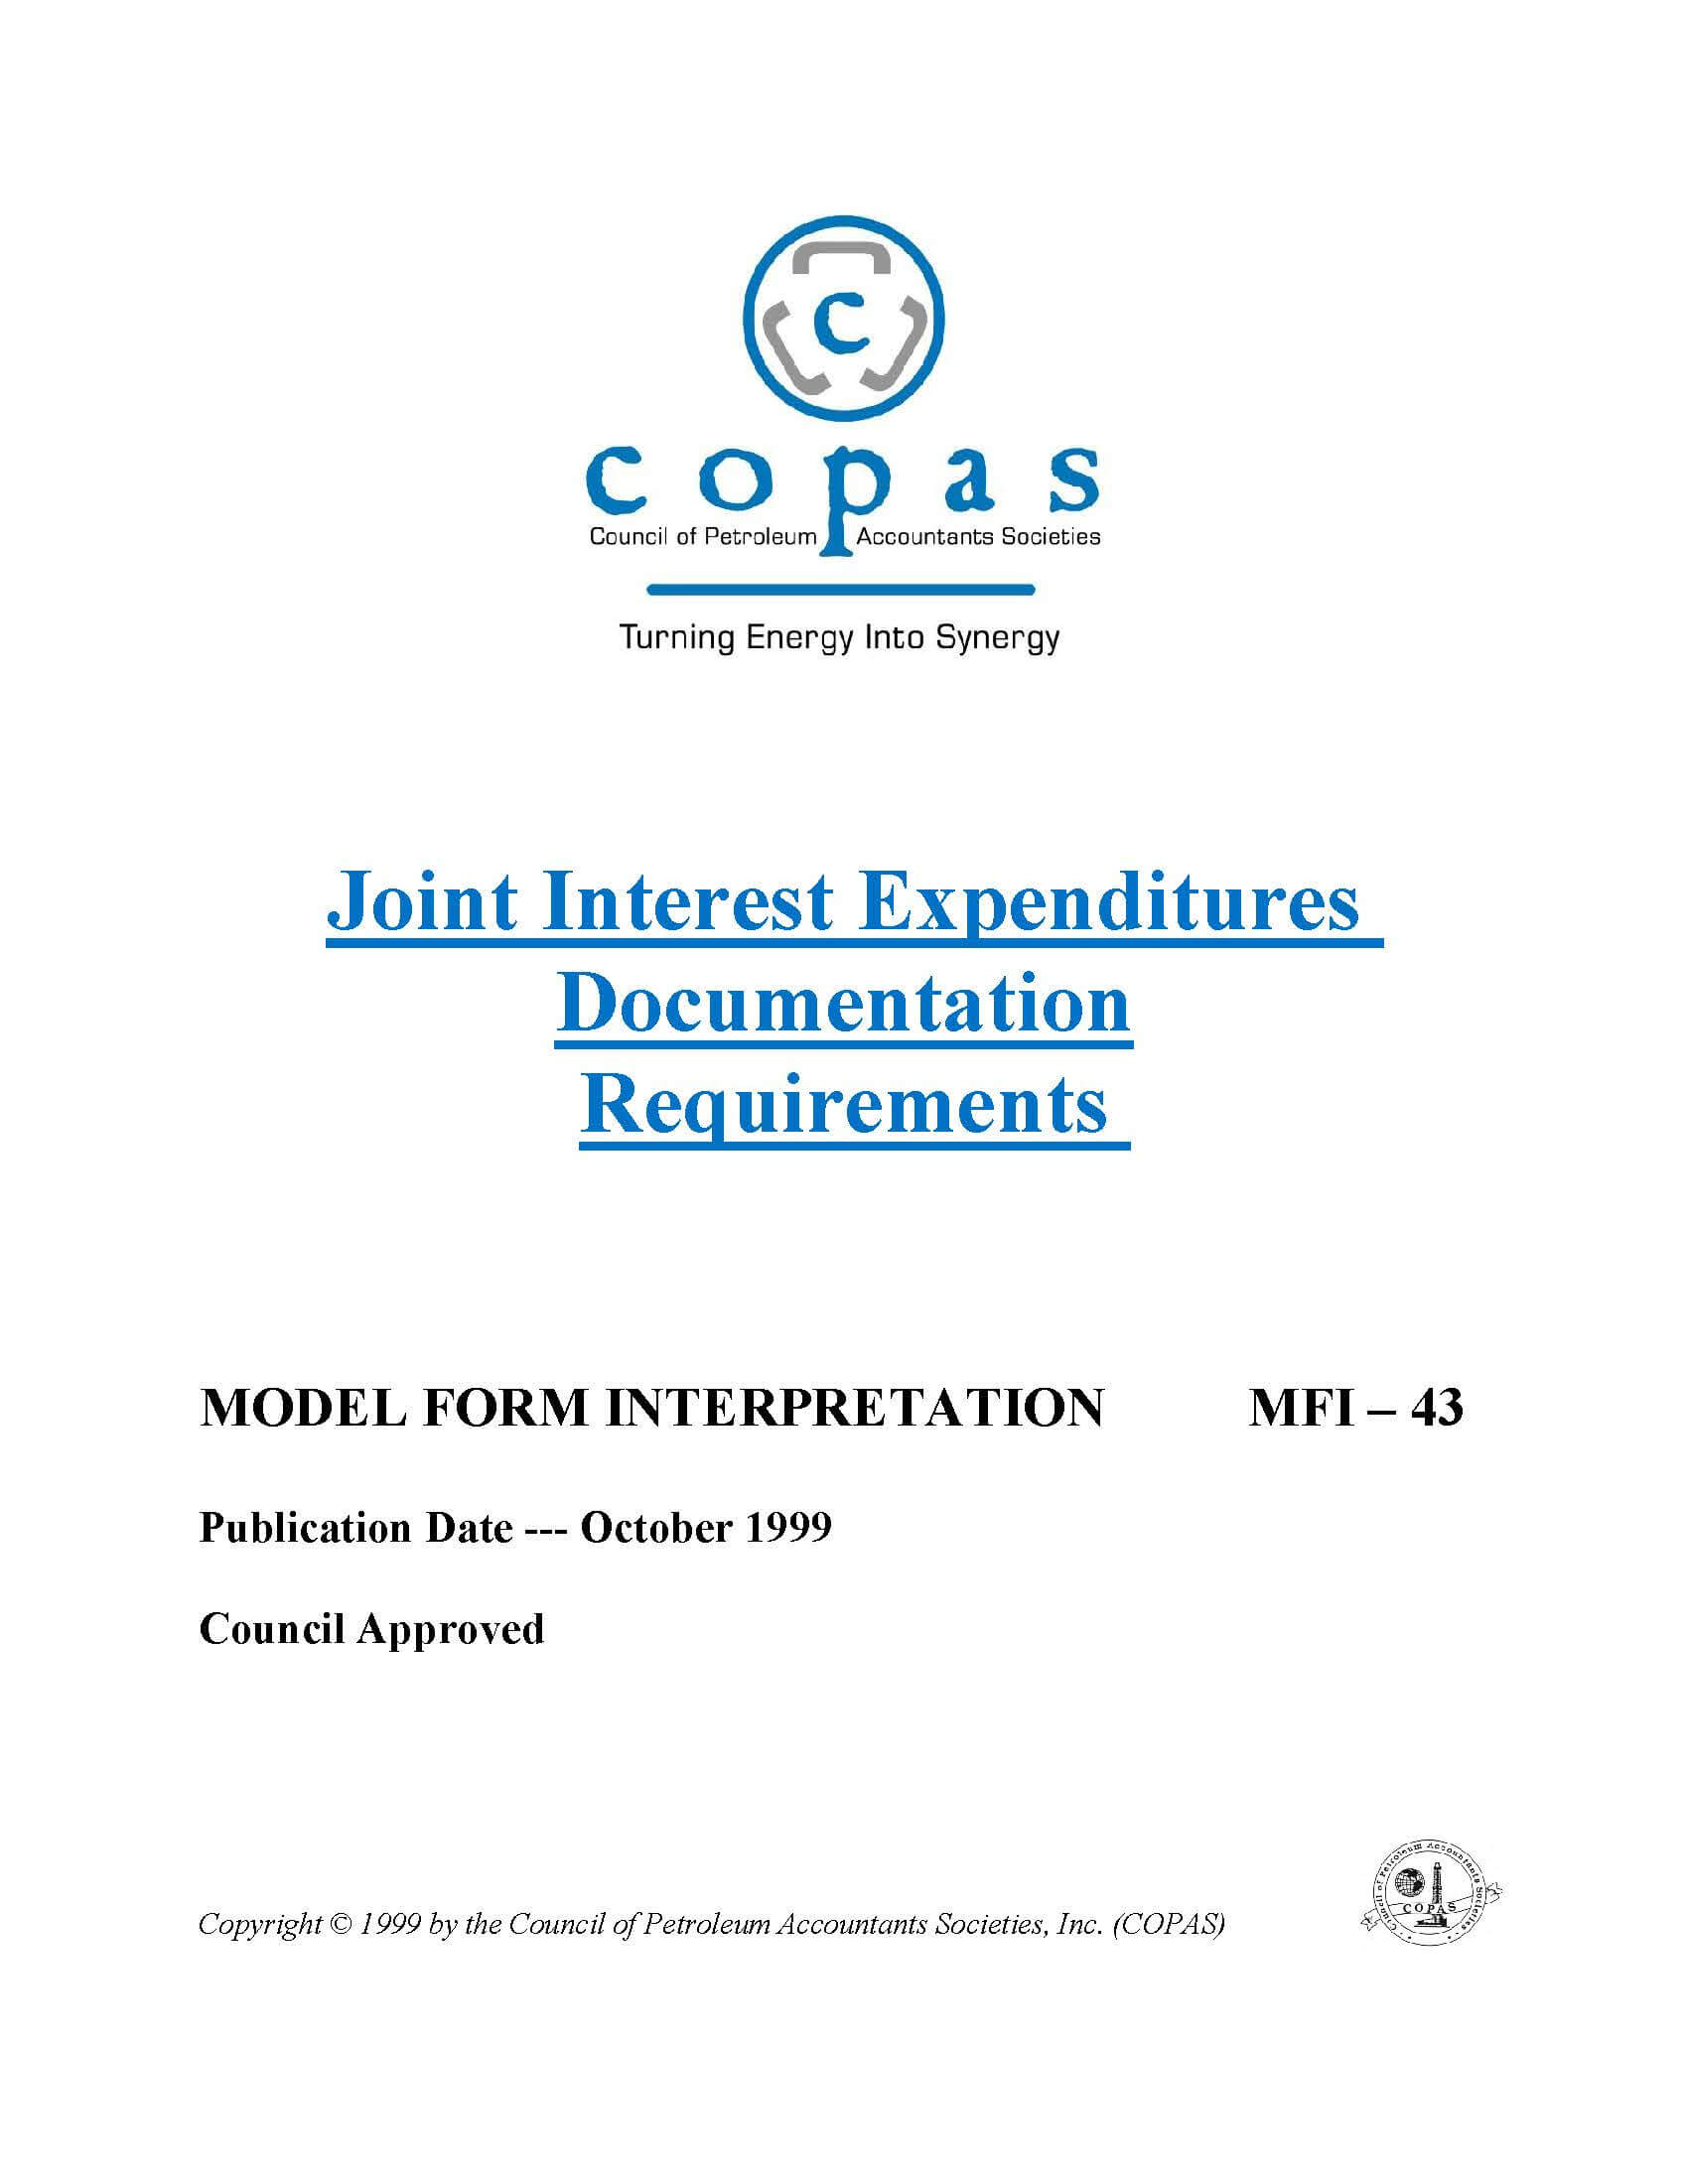 MFI-43 Joint Interest Expenditures Documentation Requirements